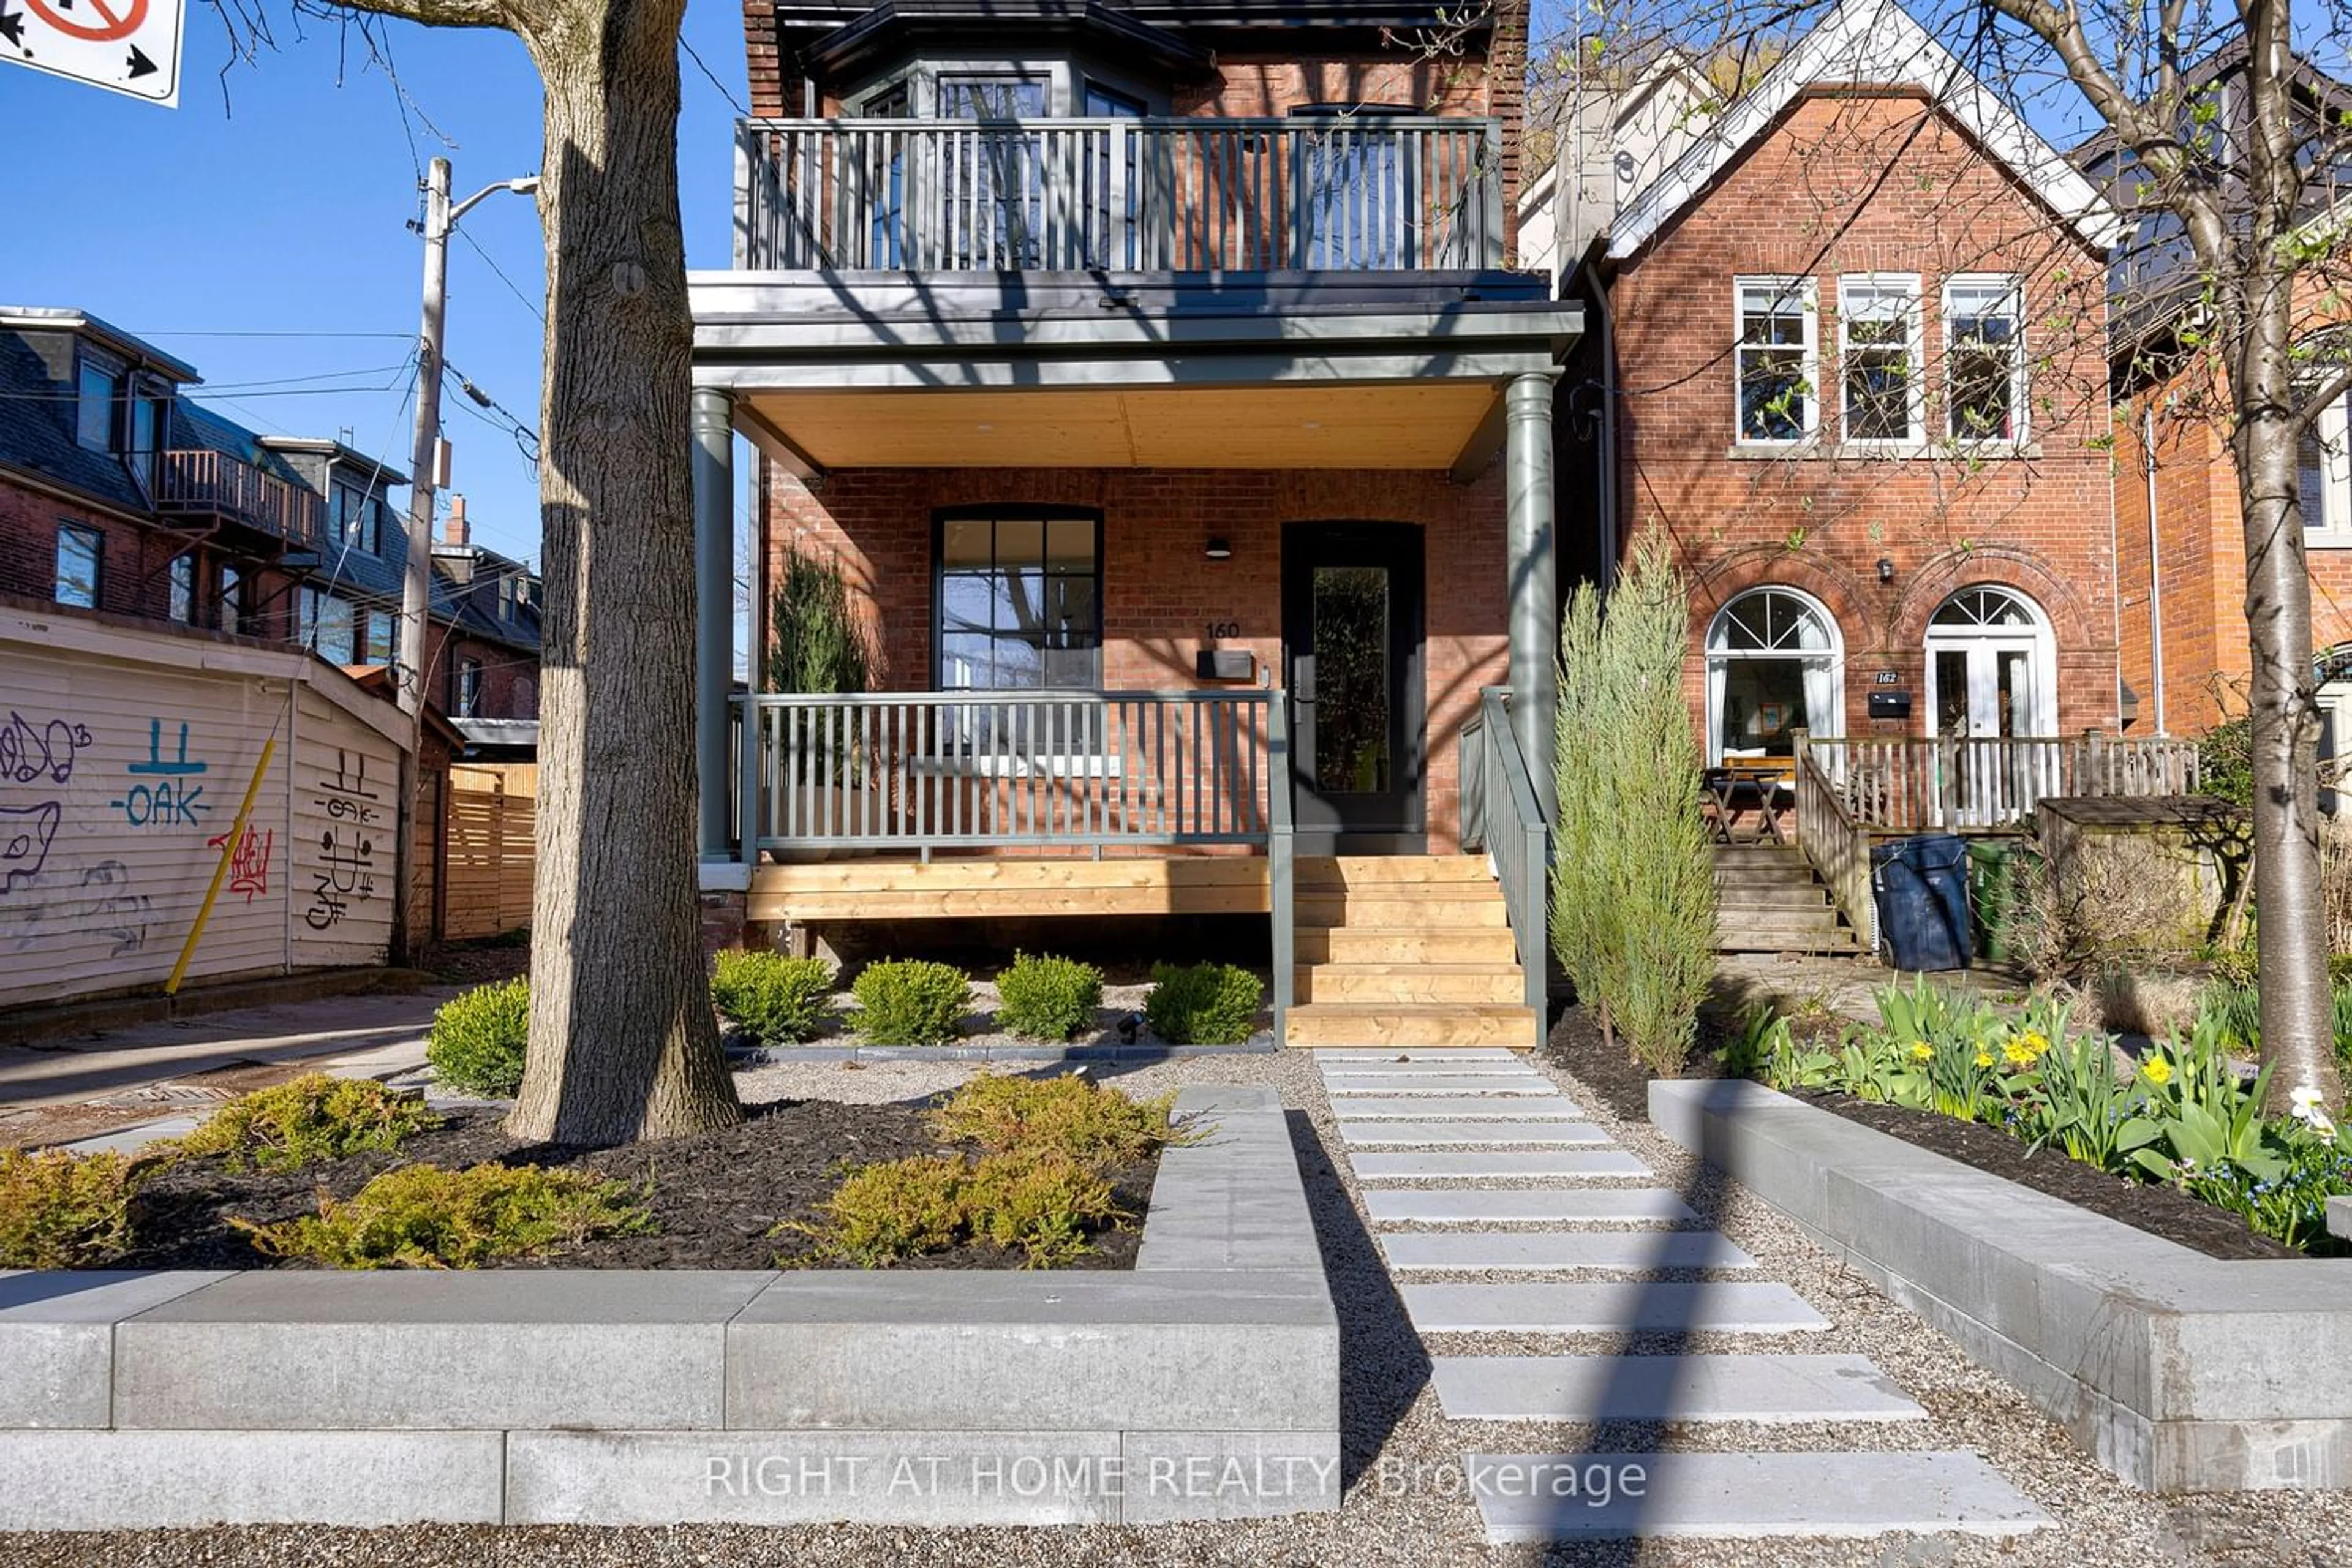 Home with brick exterior material for 160 Howland Ave, Toronto Ontario M5R 3B6